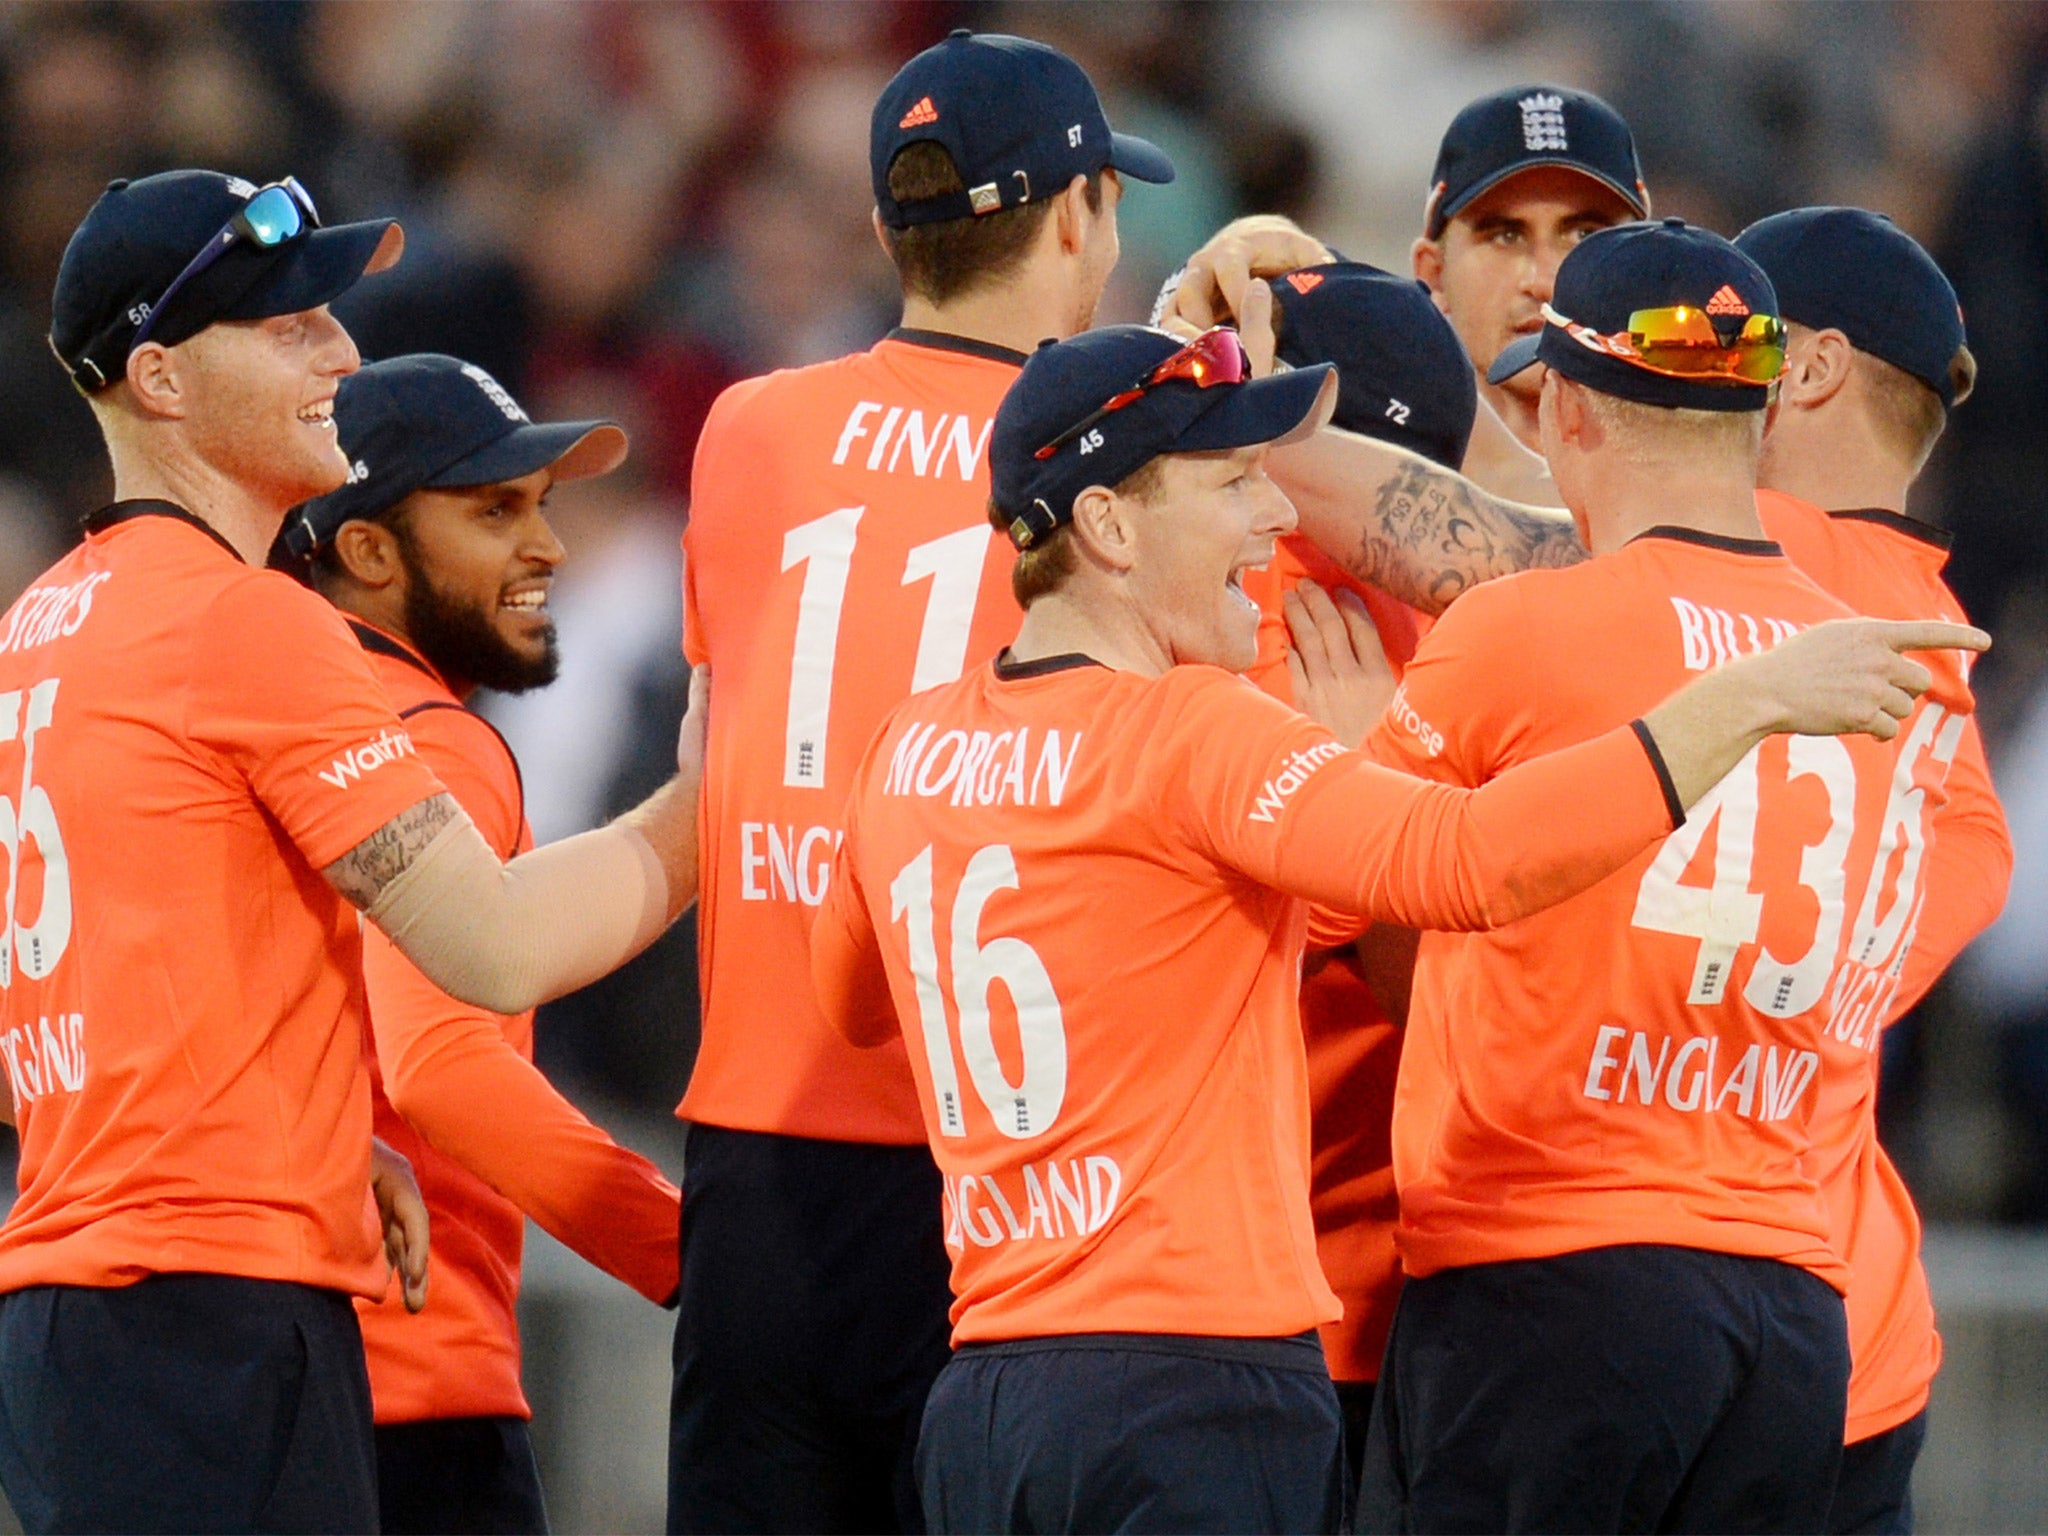 Eoin Morgan celebrates with his team-mates after Kane Williamson is run out as New Zealand lose five wickets in the space of 12 deliveries at Old Trafford